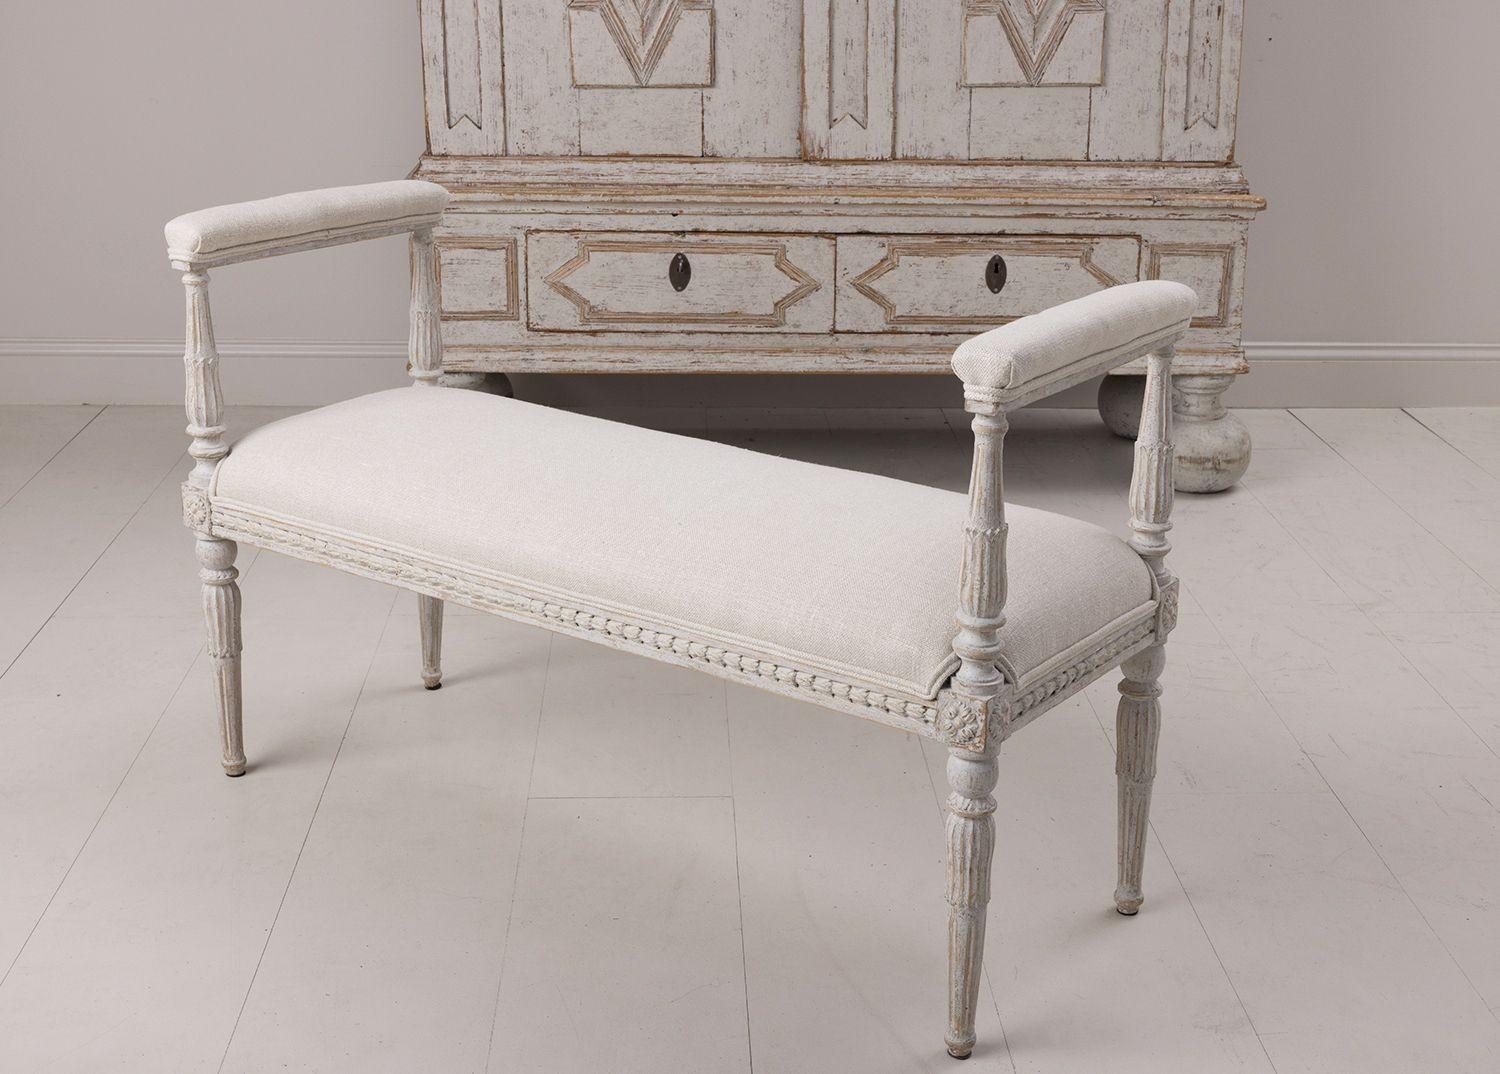 Hand-Crafted 19th C. Swedish Gustavian Painted Window Seat Bench with Armrests